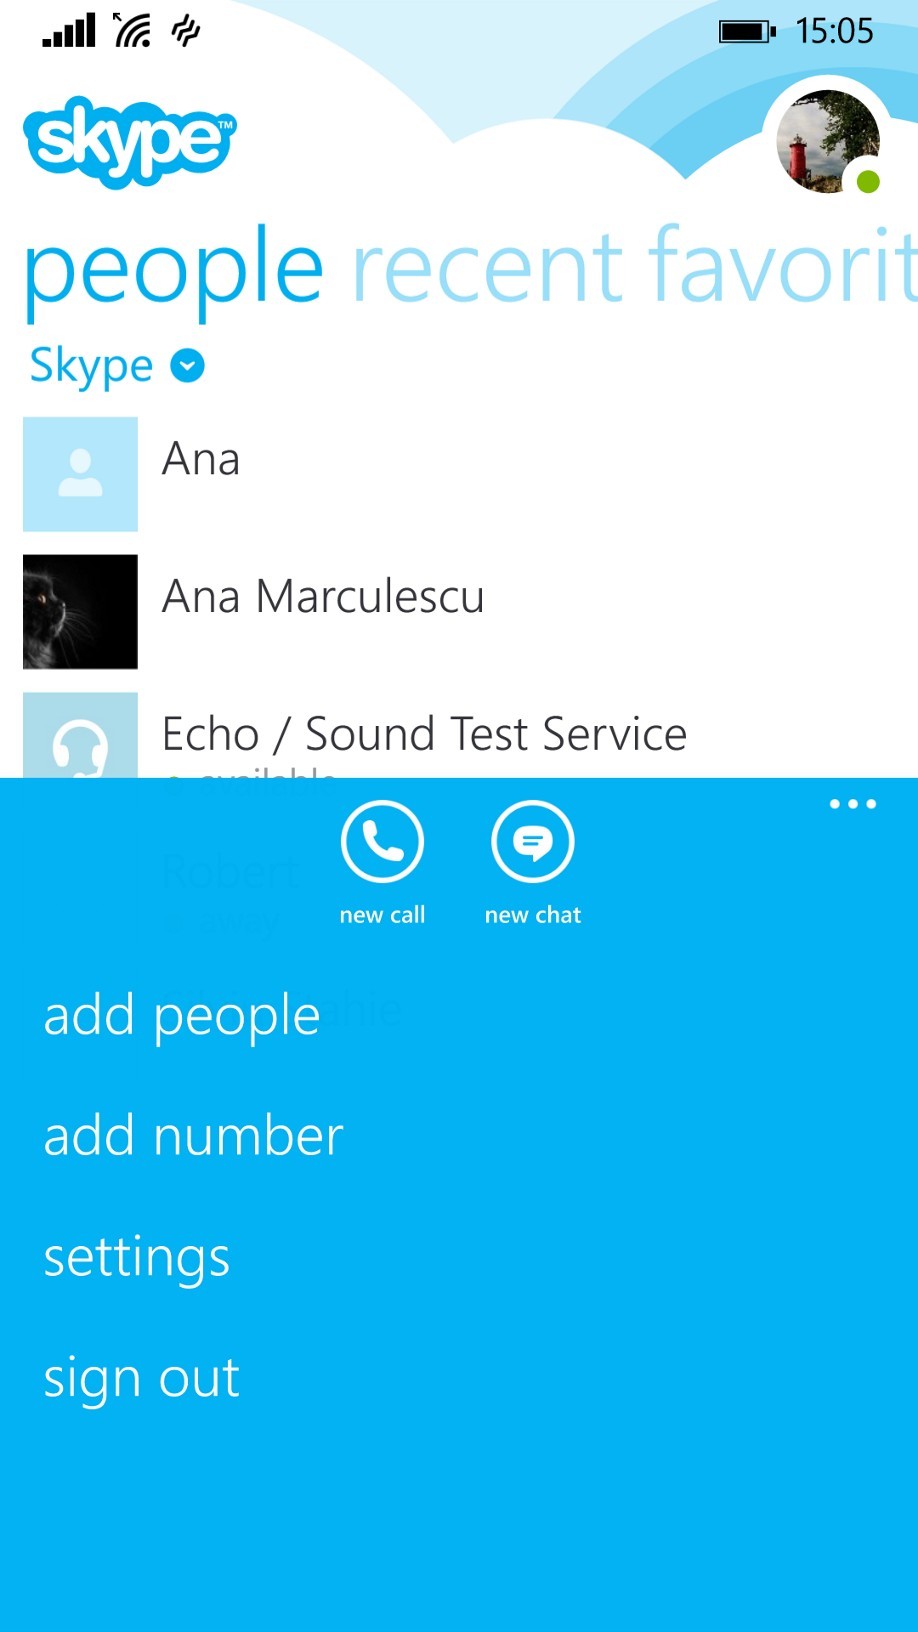 skype download for windows phone 7